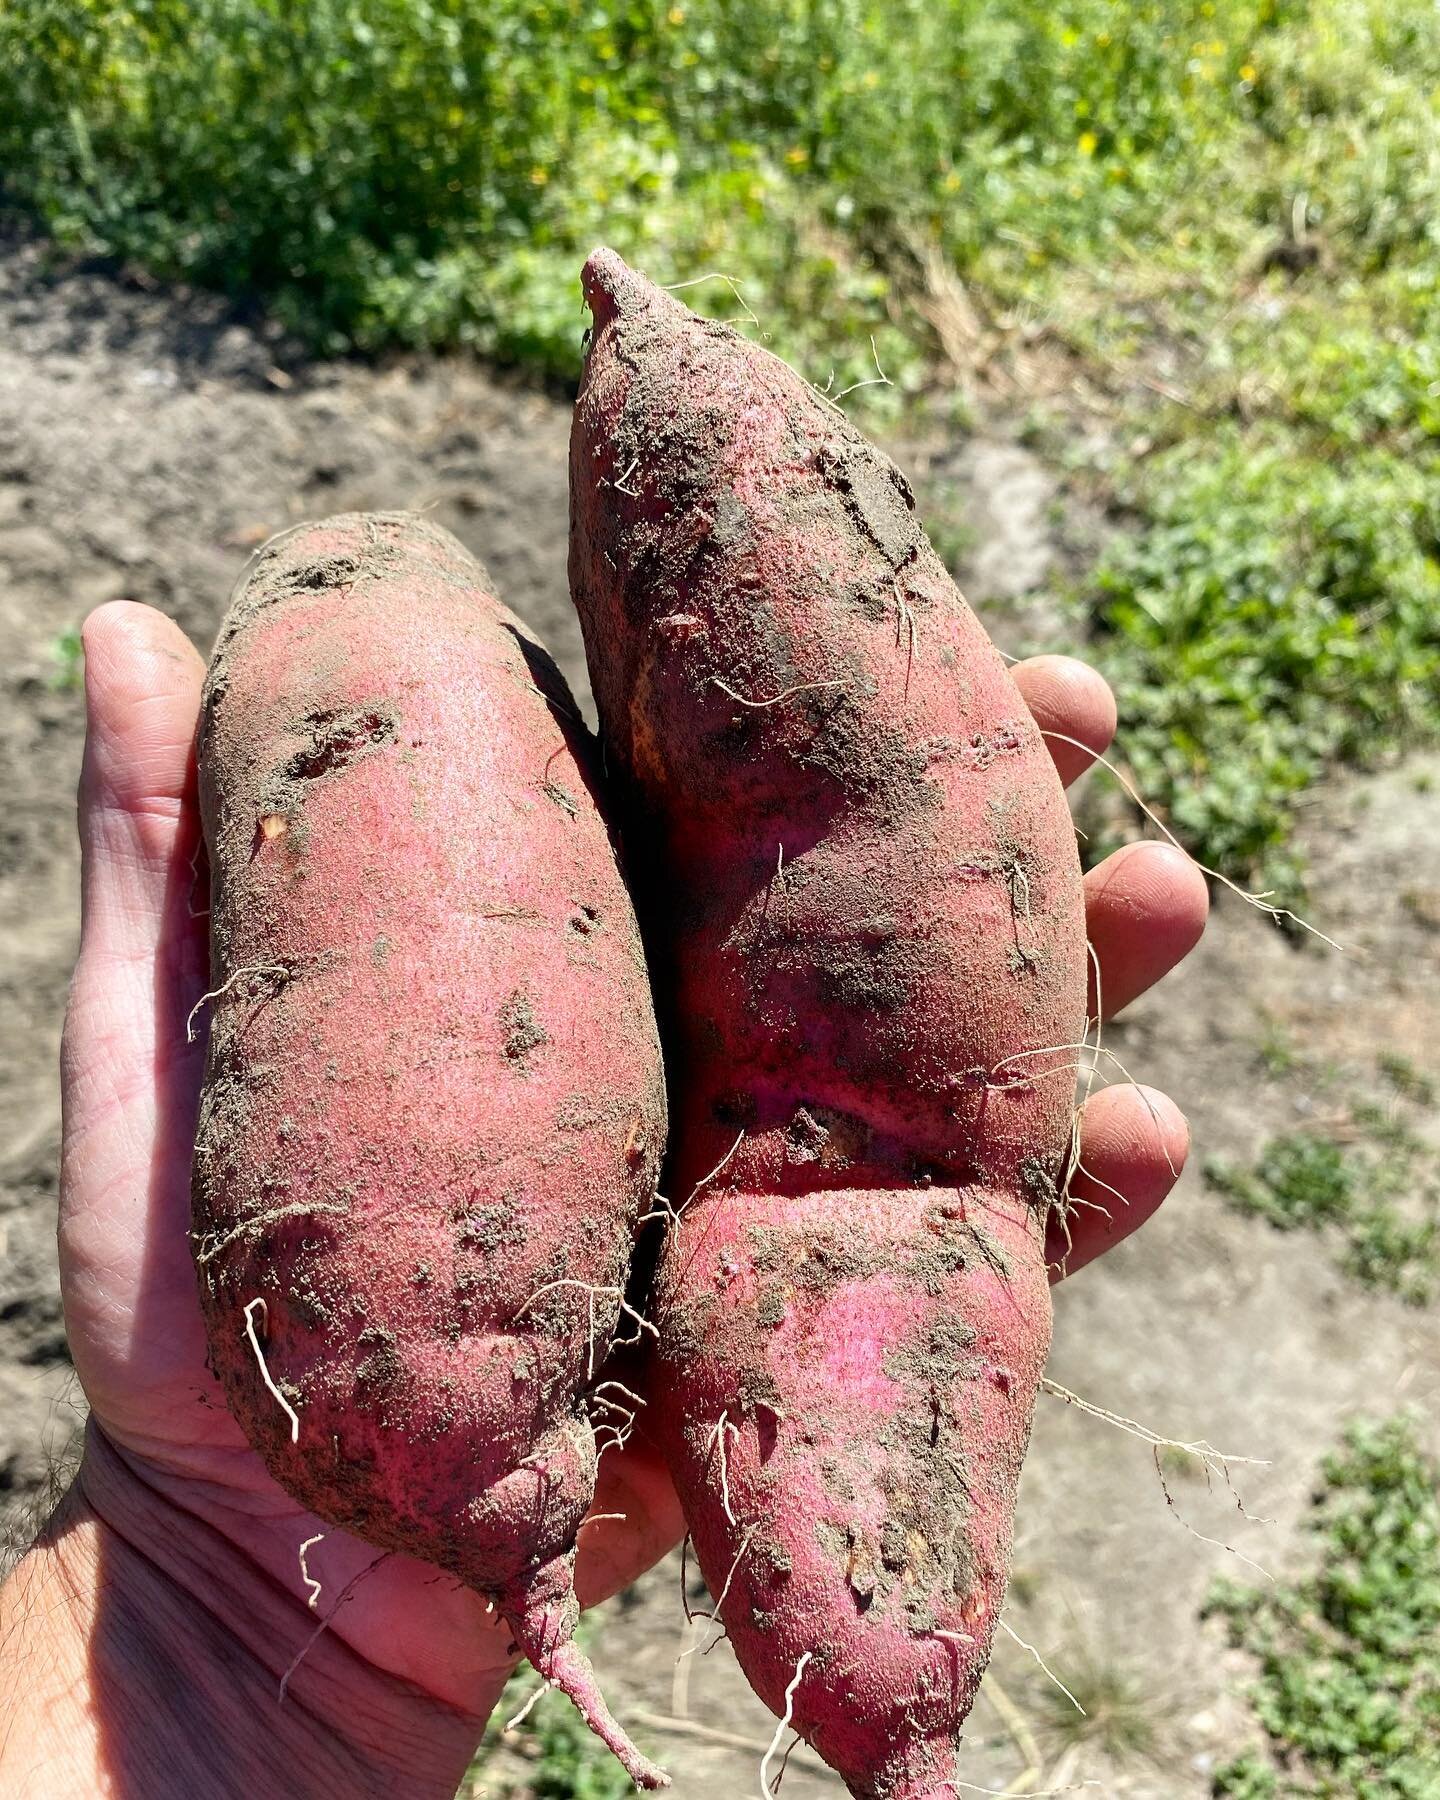 Checked just one plant today to see how they were coming along... these are just 2 of 5... I think they&rsquo;re doing just fine!
.
.
#sweetpotato #vermont #vermontfarm #knowyourfarmer #knowyourfood #buylocal #communitysupport #comingsoon #tubers #ro